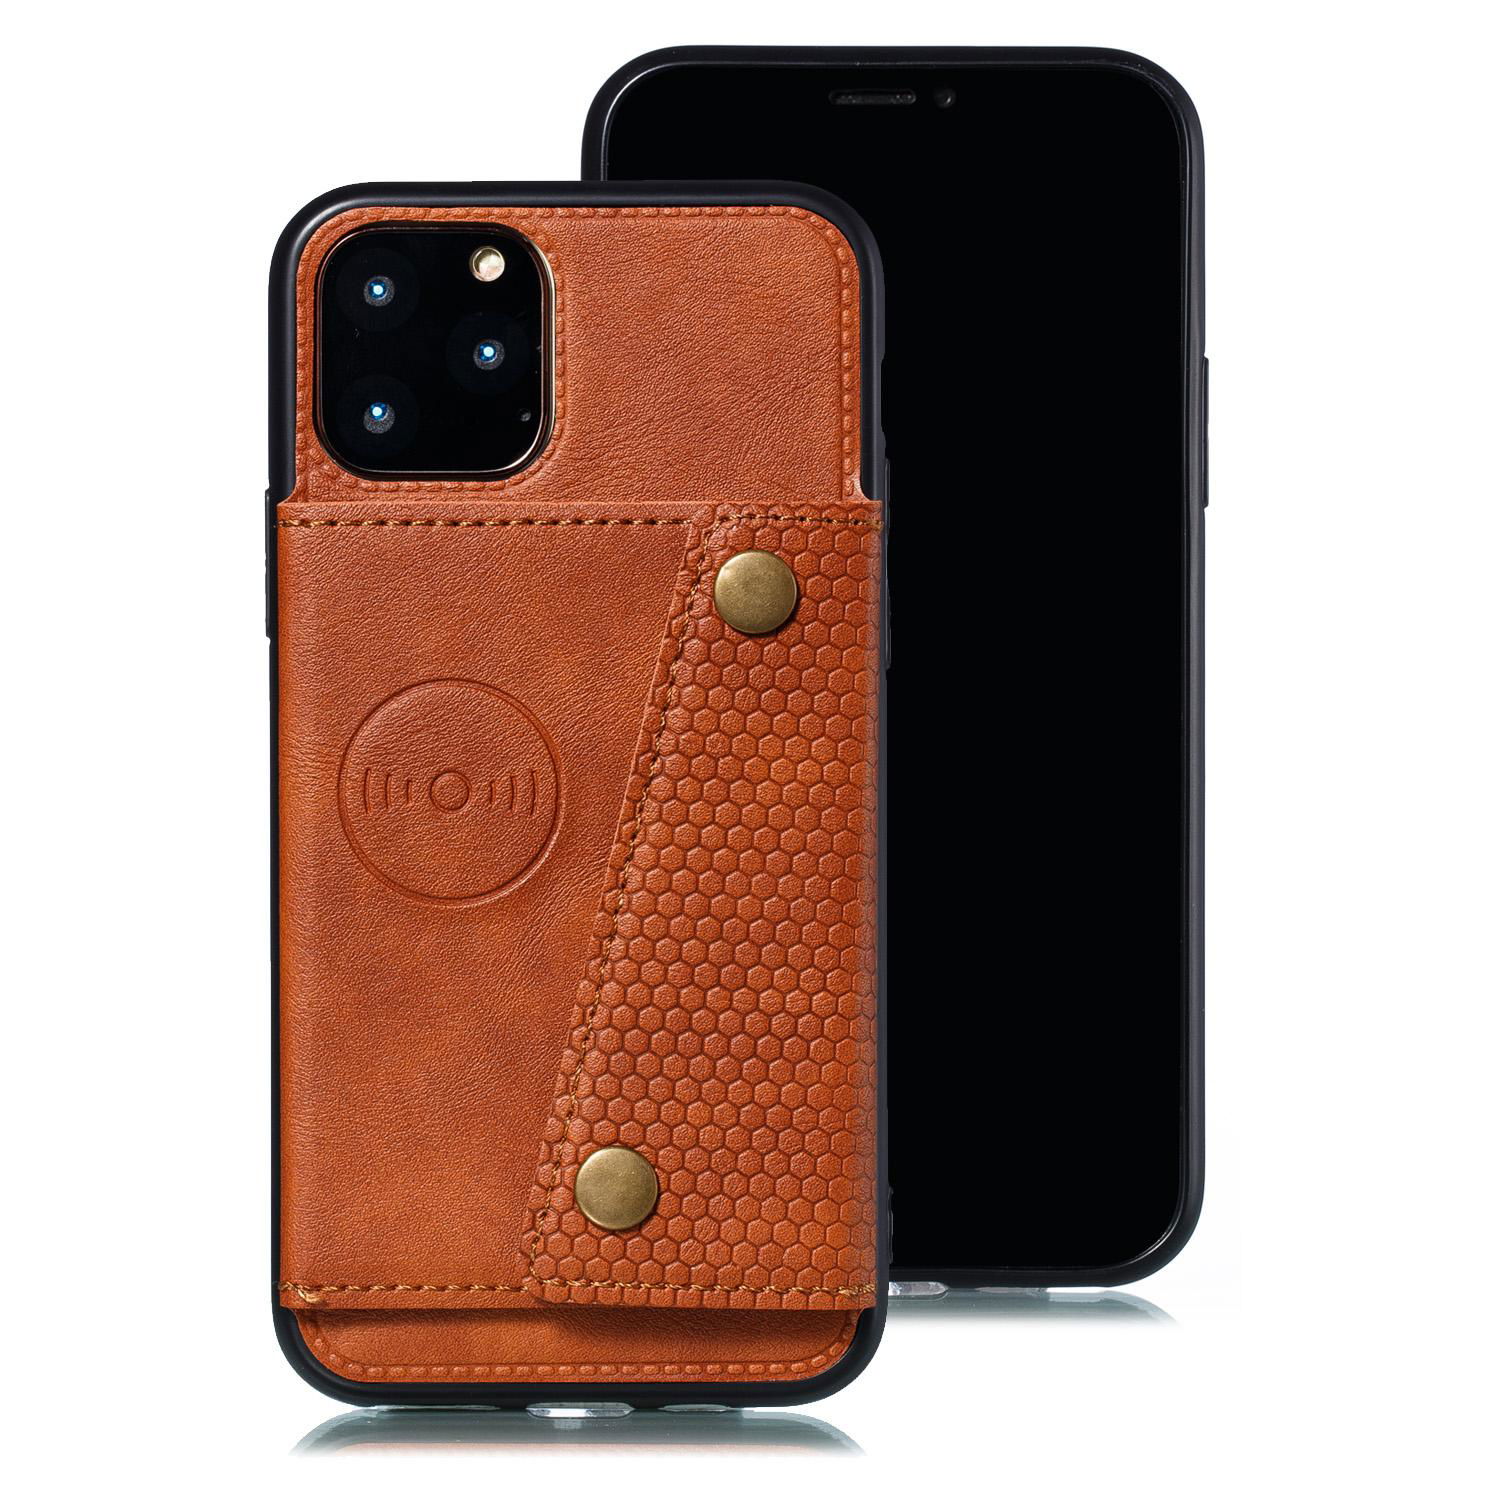 Leather Wallet Mobile Phone Bag Cellphone Case for iphone 12 5